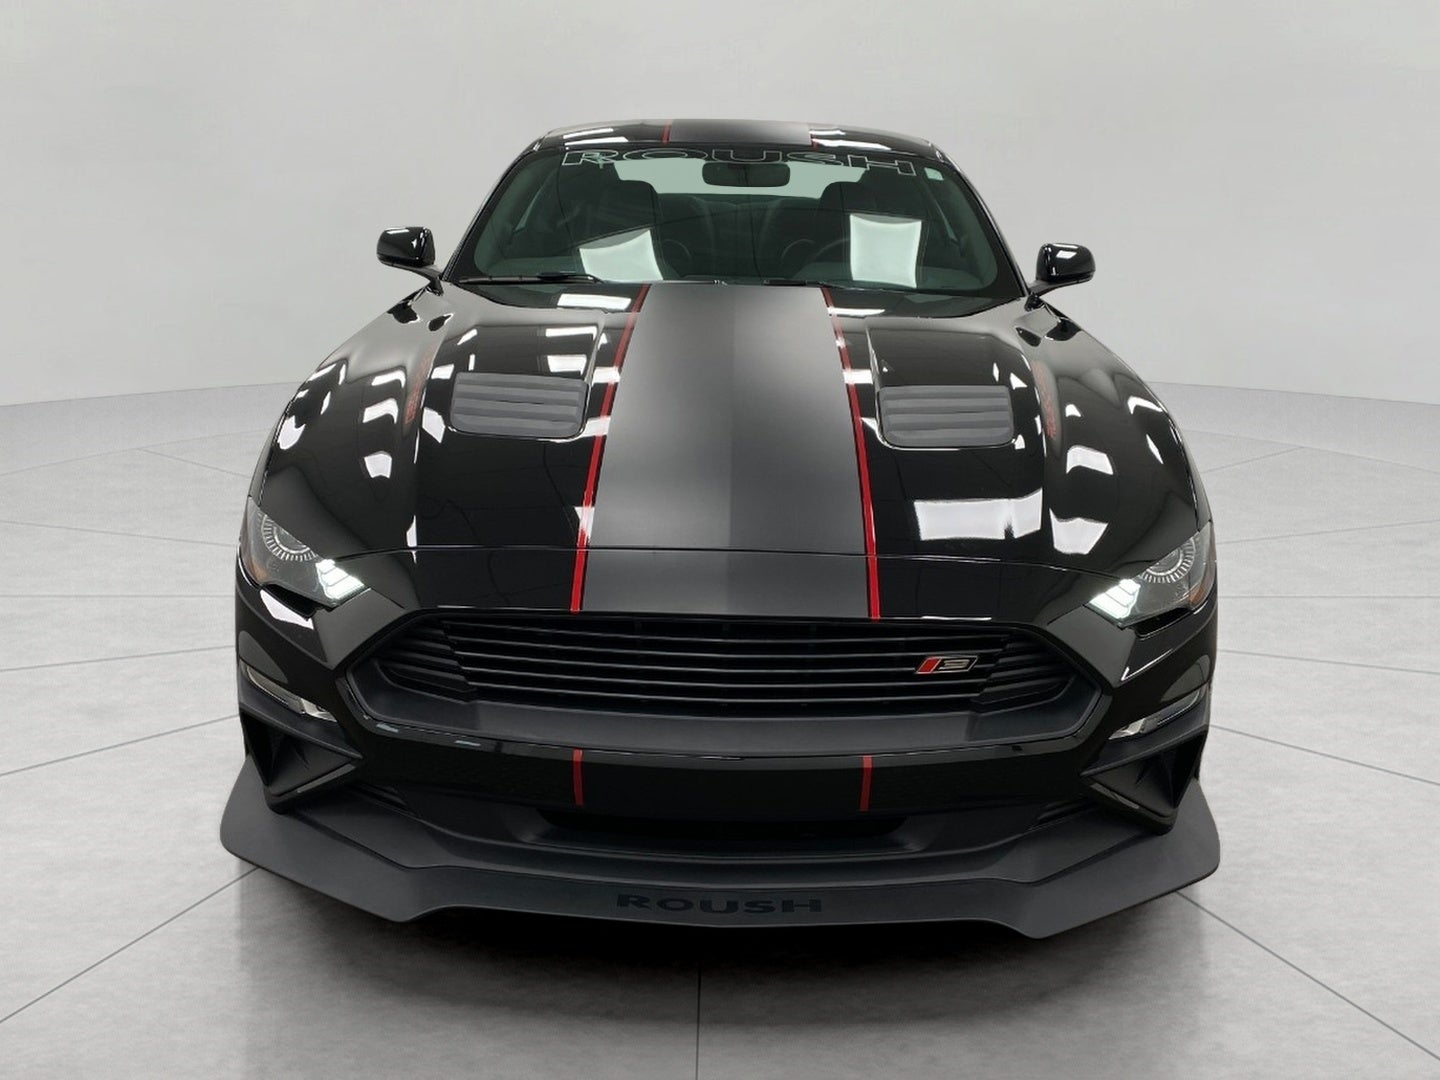 2019 Ford Mustang GT PREMIUM ROUSH STAGE 3